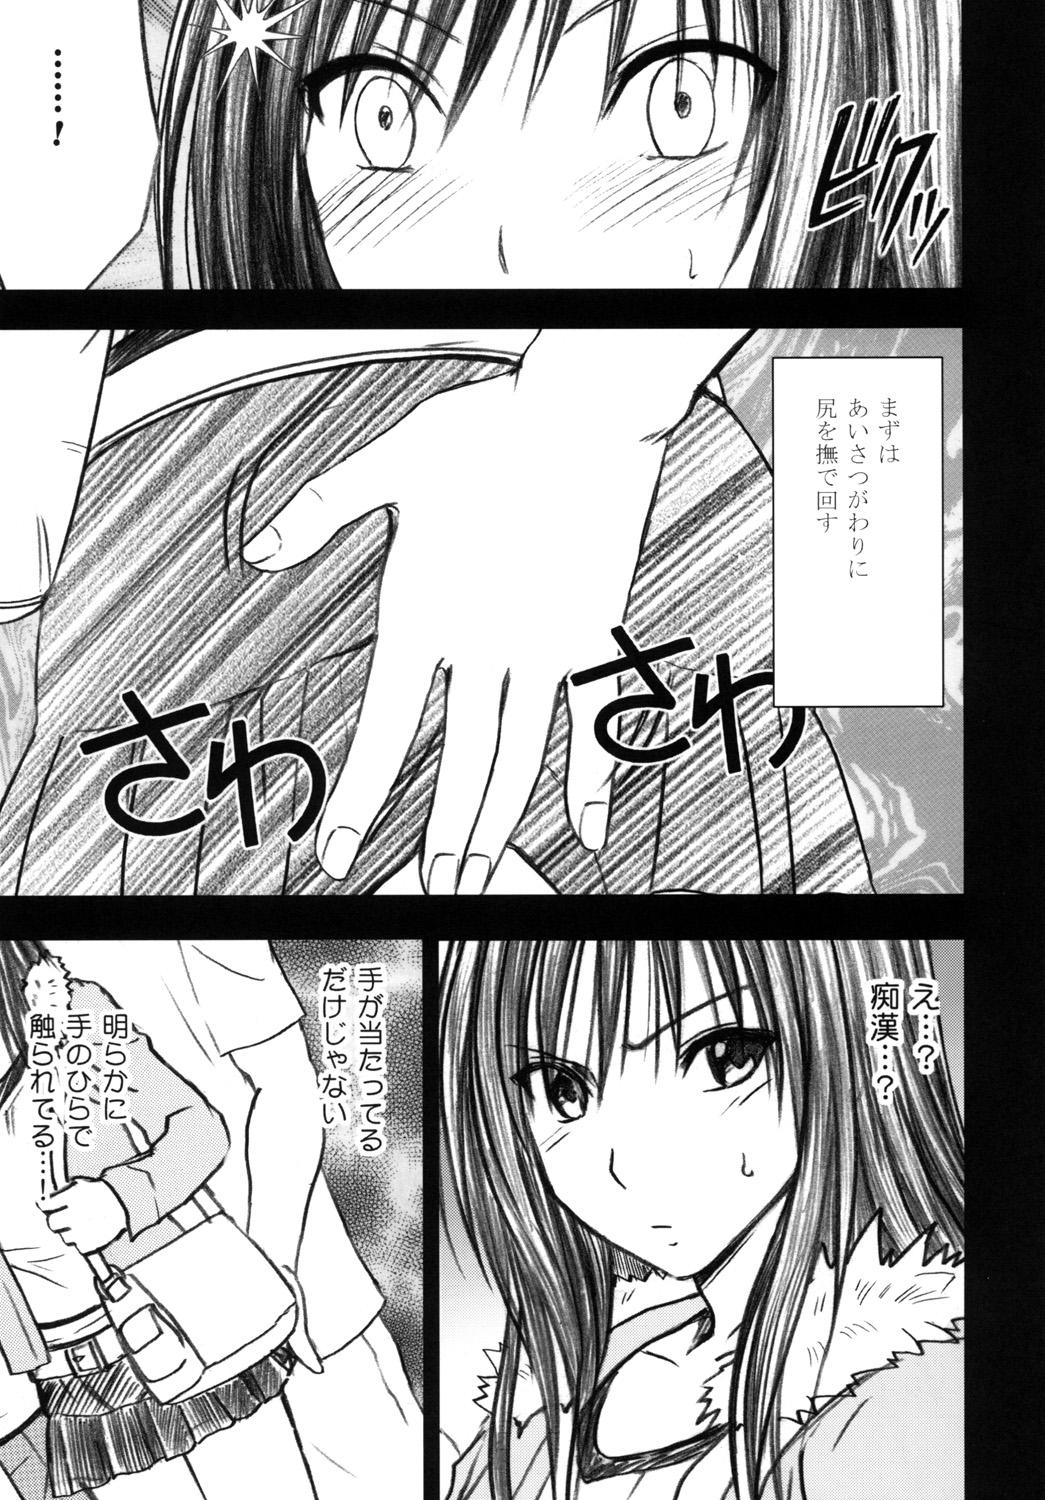 Best Blowjob Tada no Haji 2 - The only shame - To love ru Ball Licking - Page 8